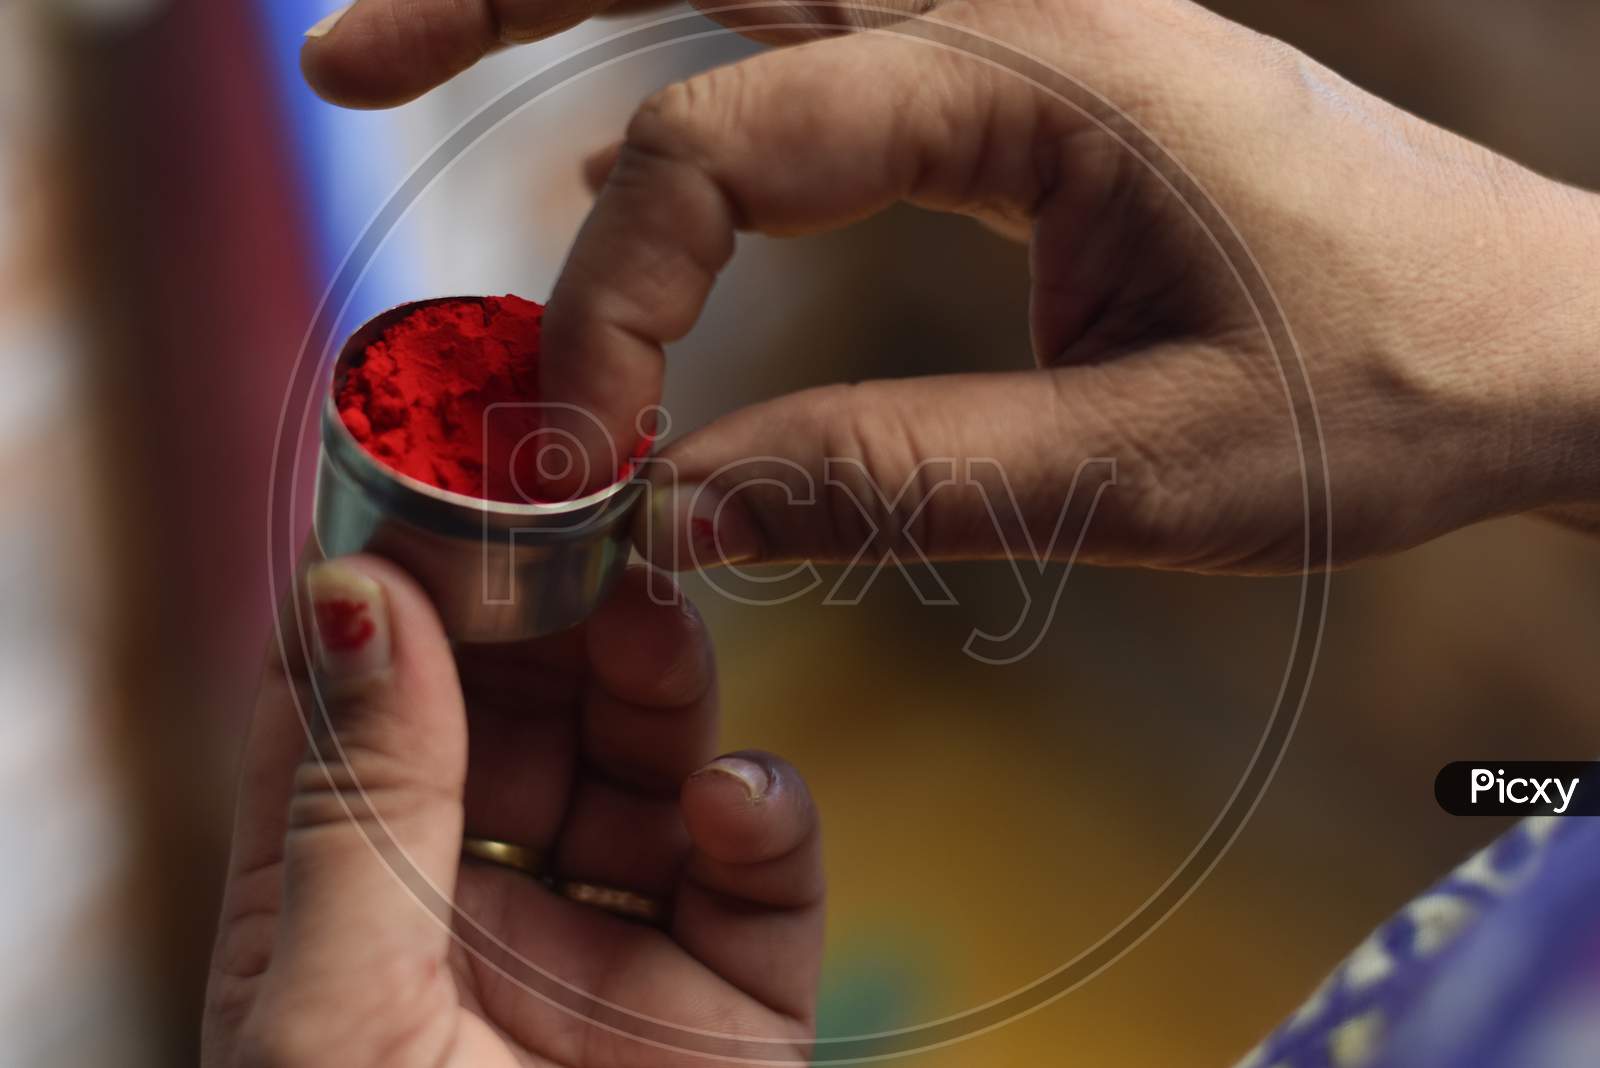 indian traditional sindoor (vermilion) box in a girl hand with shallow depth of field, Indian Culture